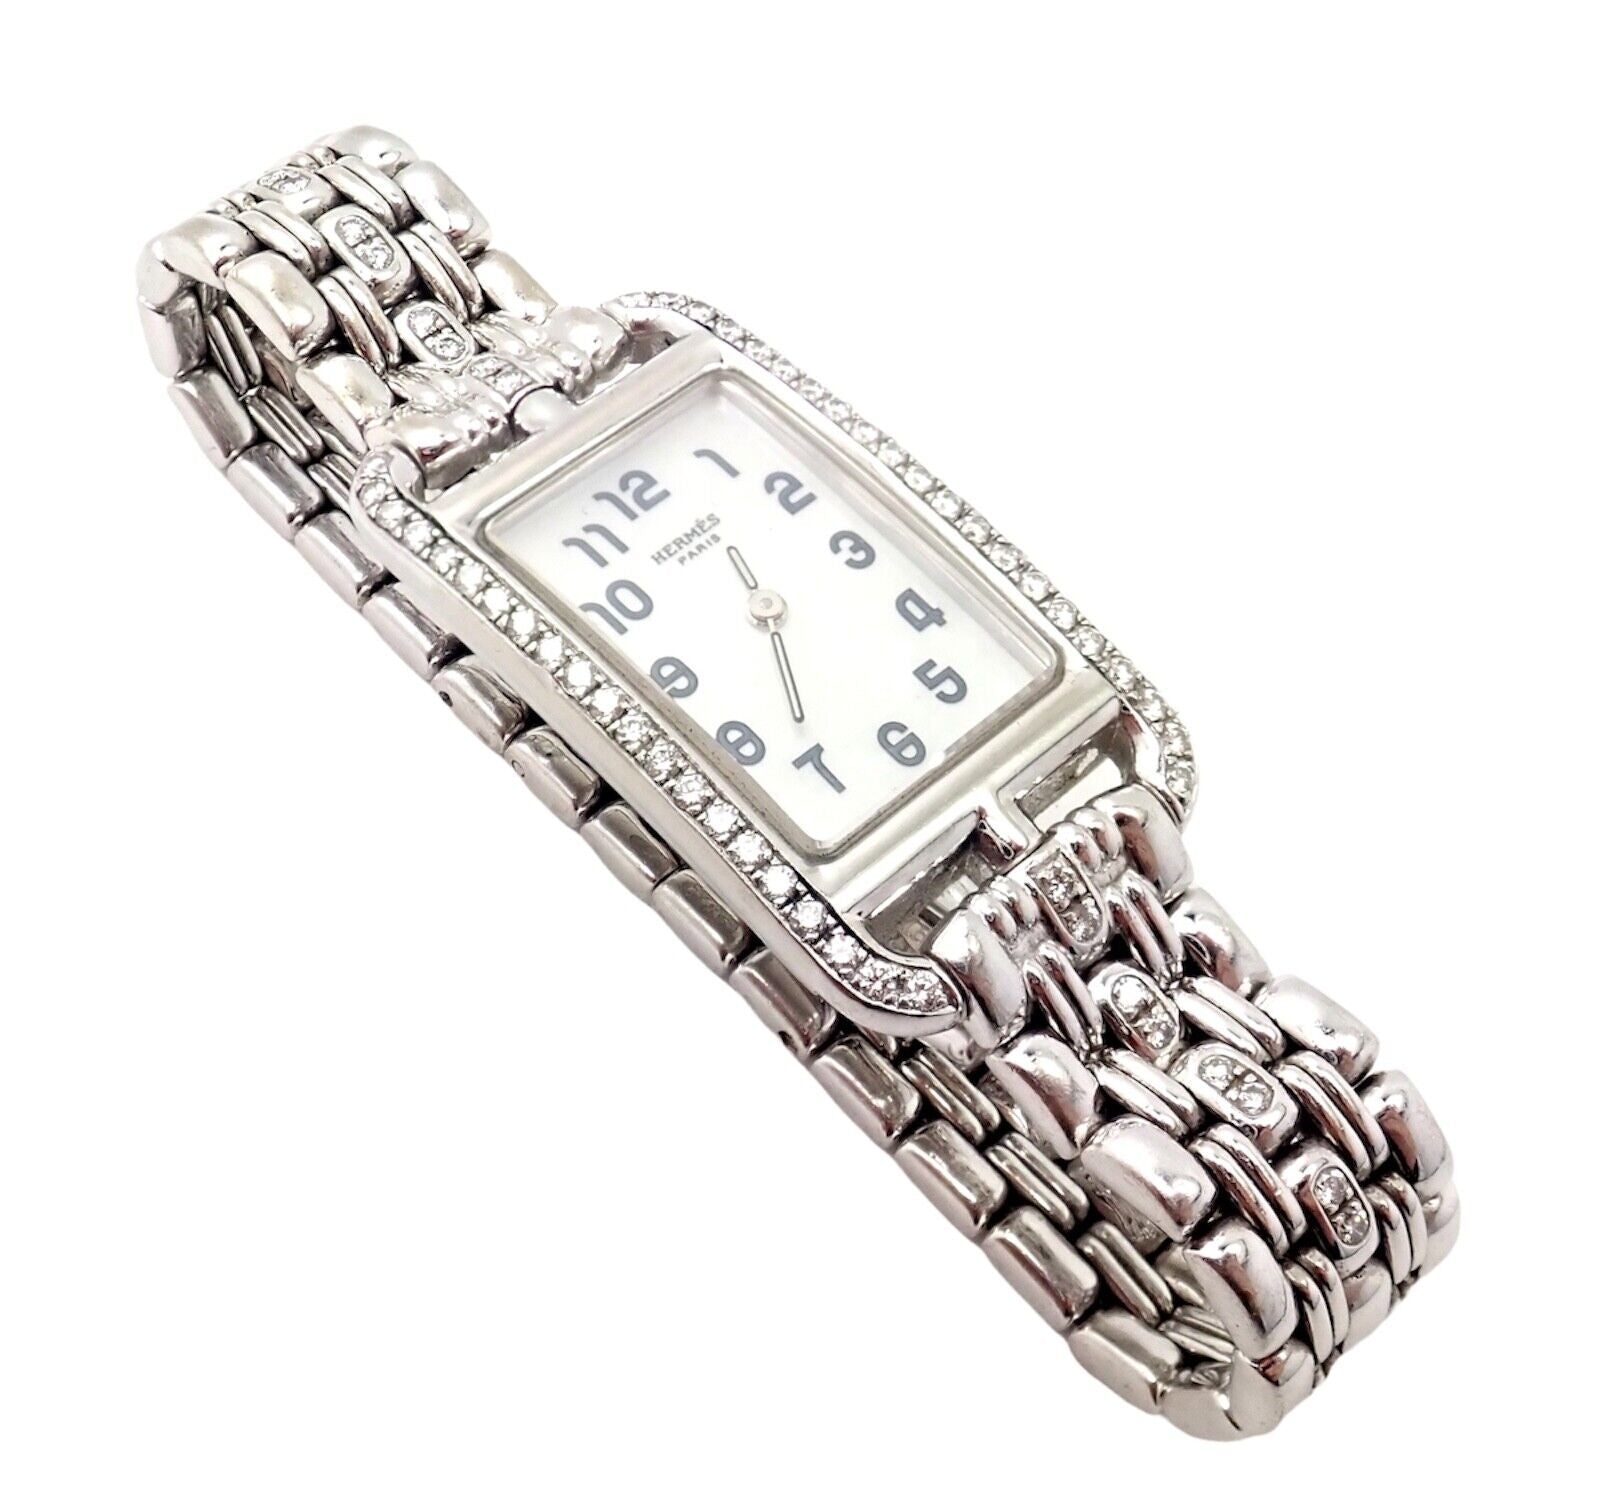 Hermes Jewelry & Watches:Watches, Parts & Accessories:Watches:Wristwatches Authentic! Hermes 18k White Gold Diamond Cape Cod Nantucket Ladies Watch NA1.292